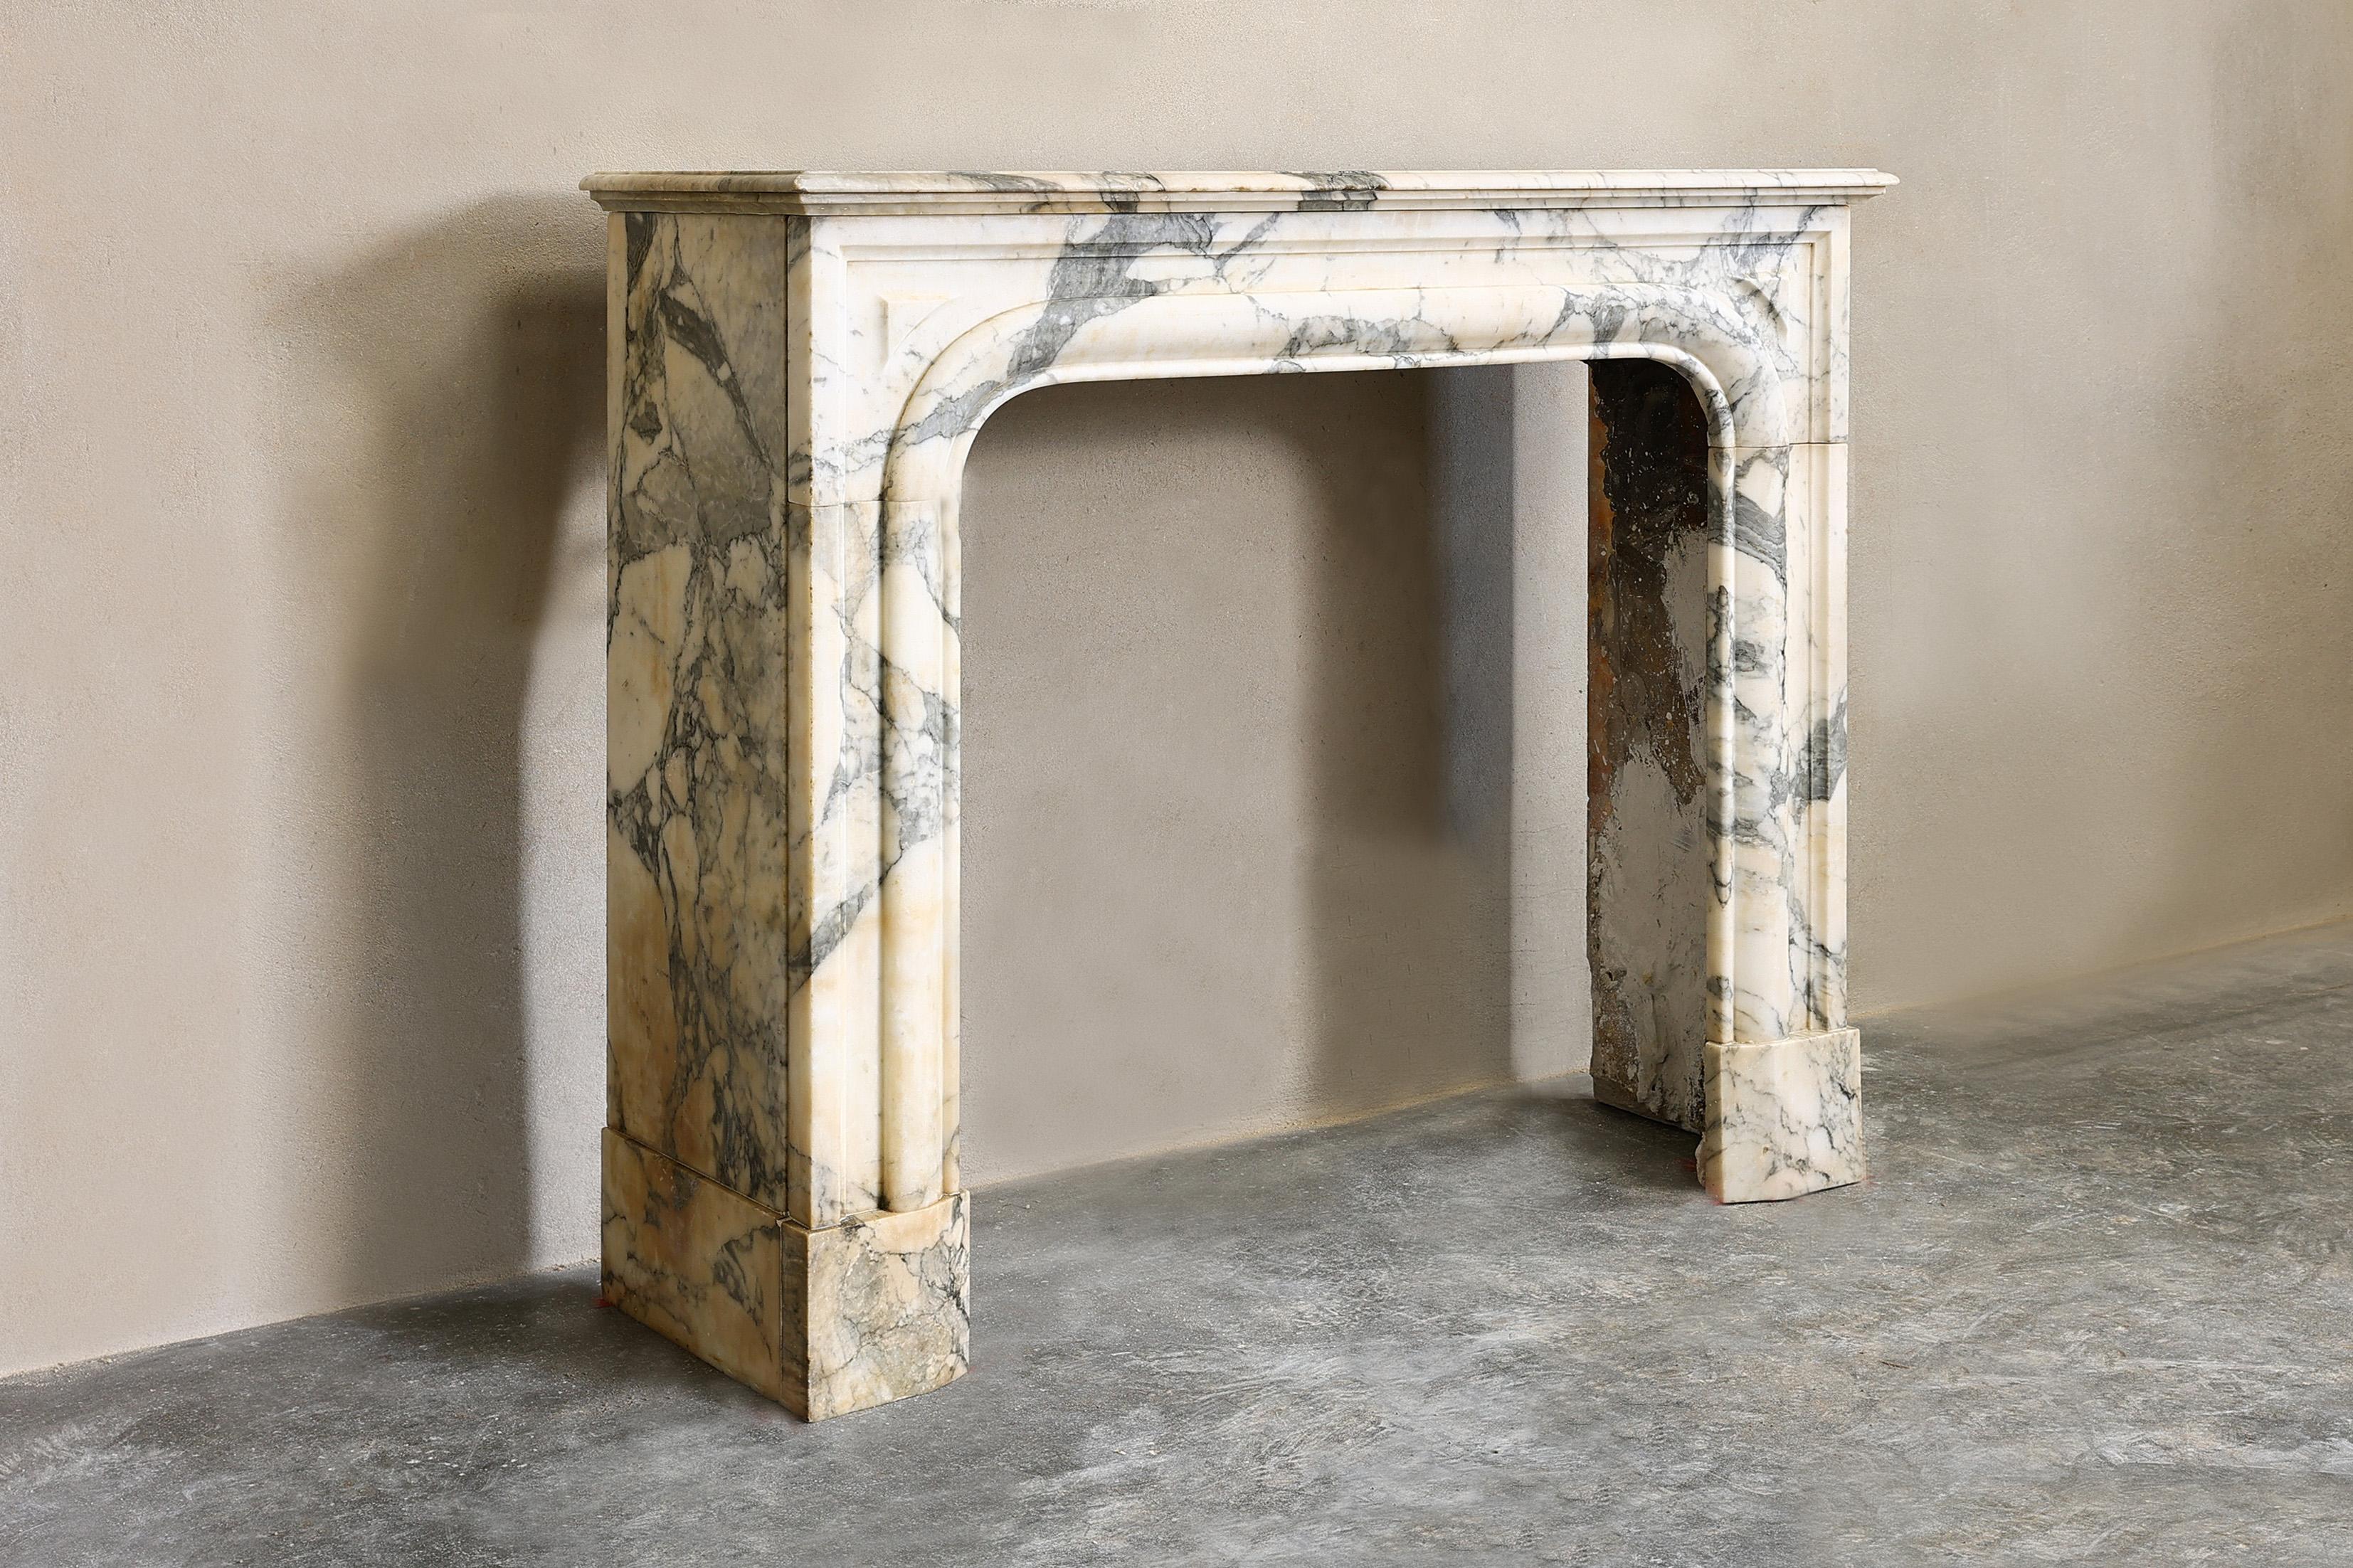 Very nice compact marble fireplace of Arabescato marble from Italy in style of Louis XIV. Arabescato is a white to cream-colored marble type that is always veined and that occurs in the Apennines north of Carrrara. The simple shape and color scheme